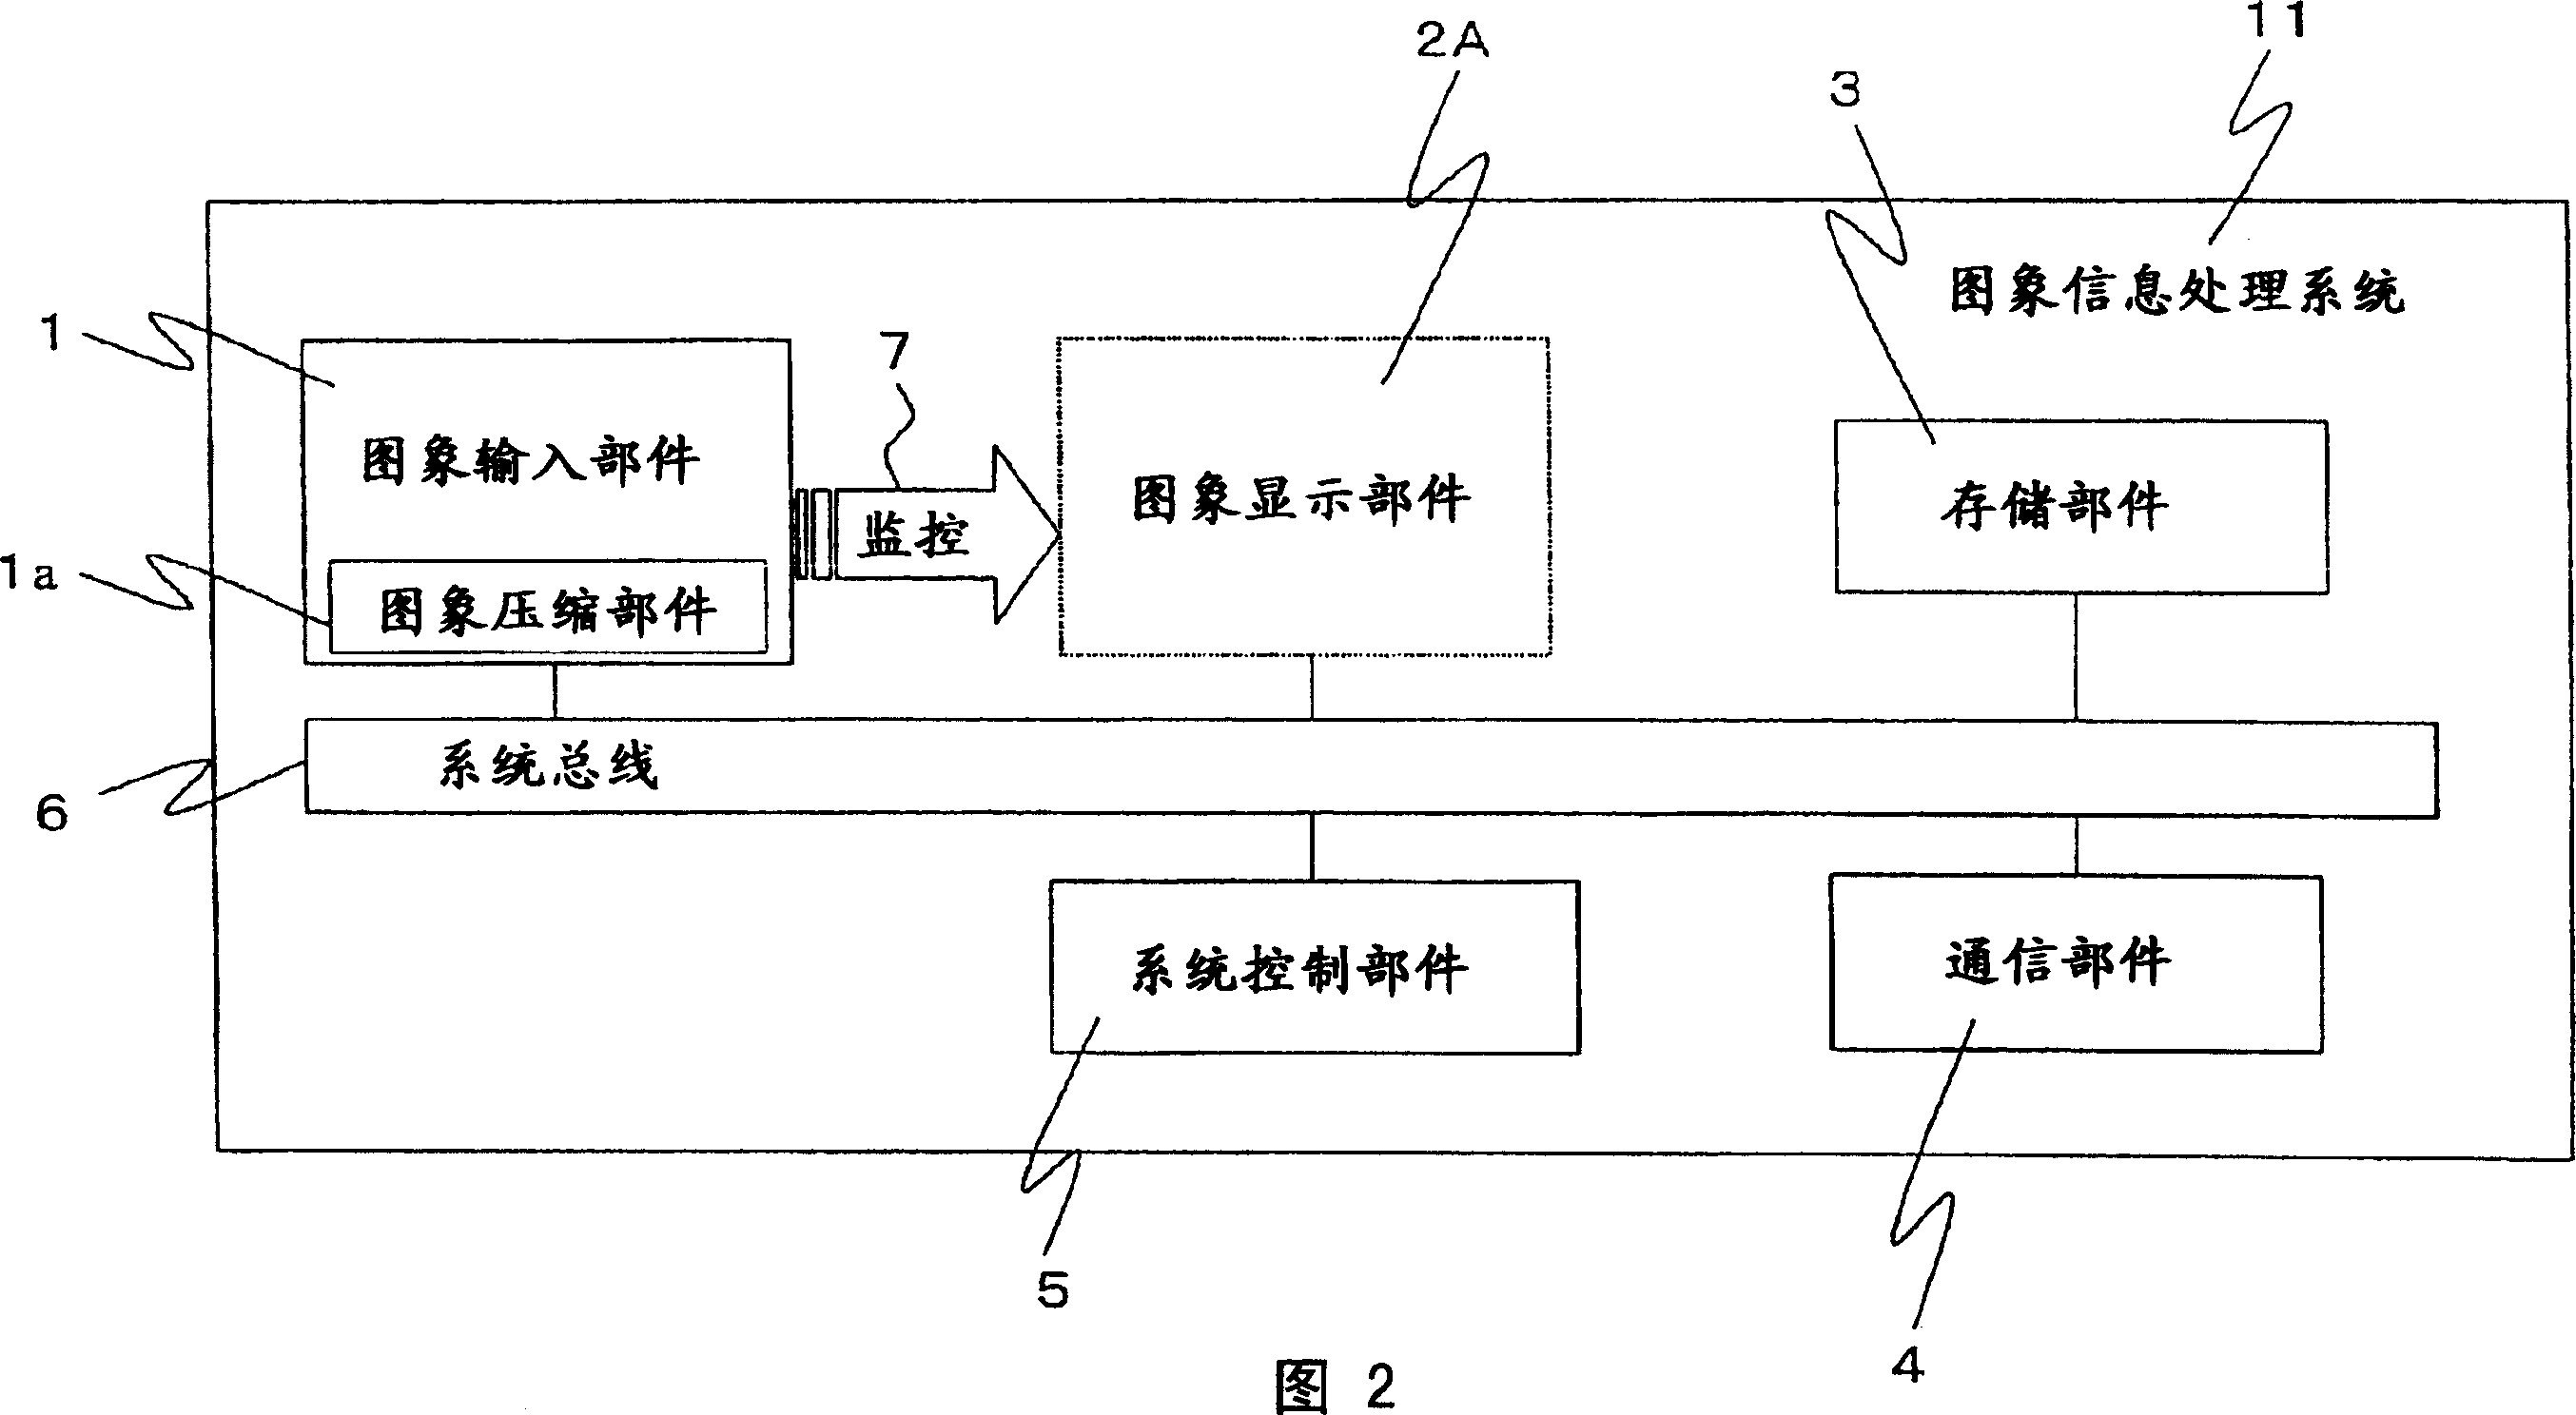 Method and system for processing image data